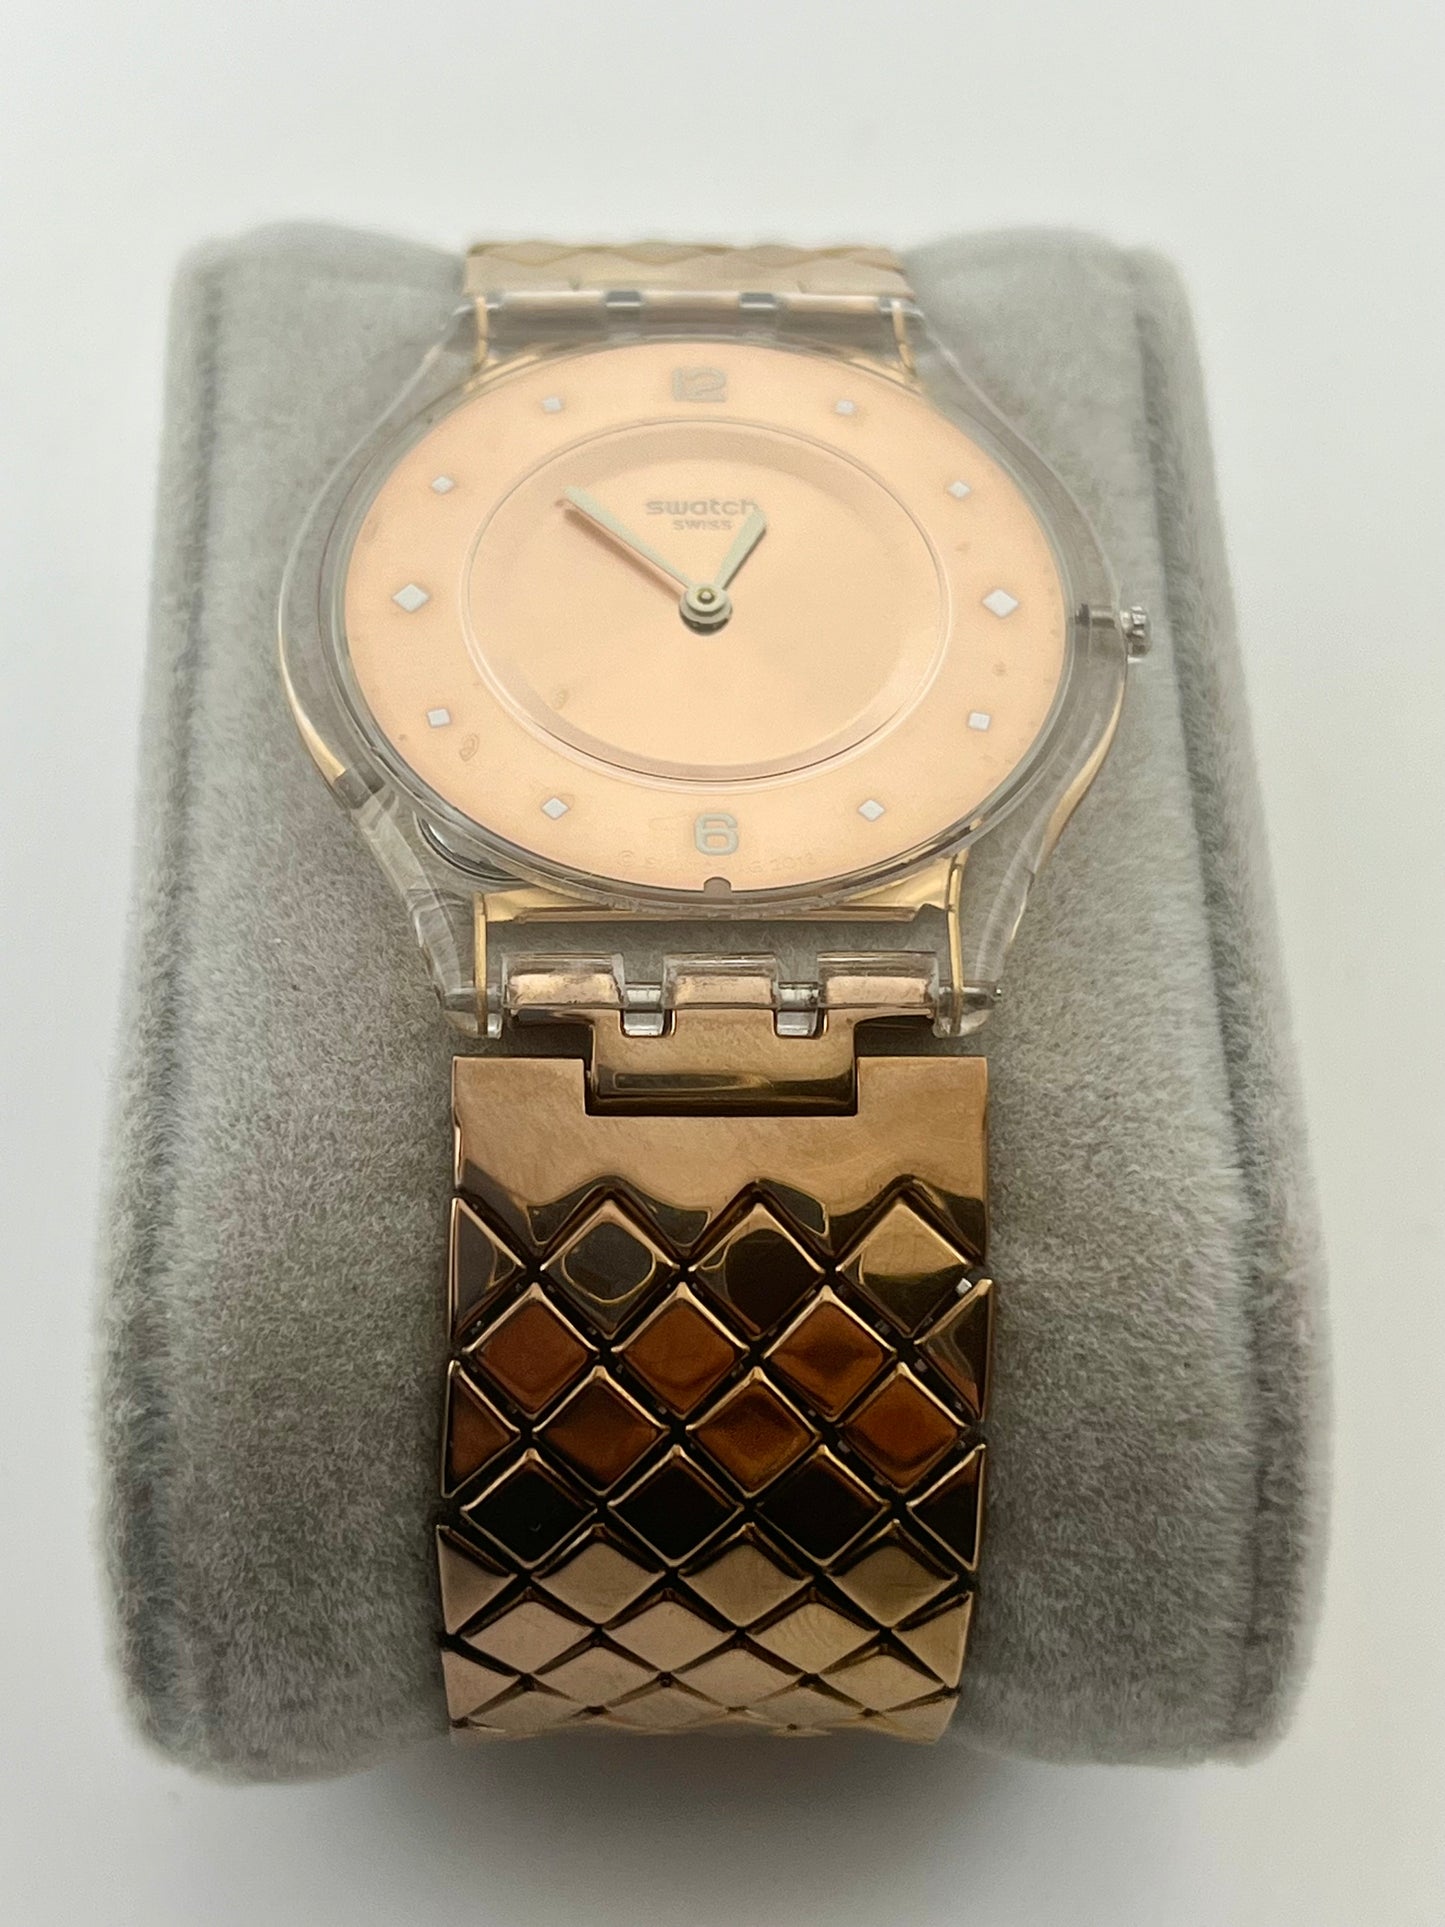 Swatch gold tone very thin watch